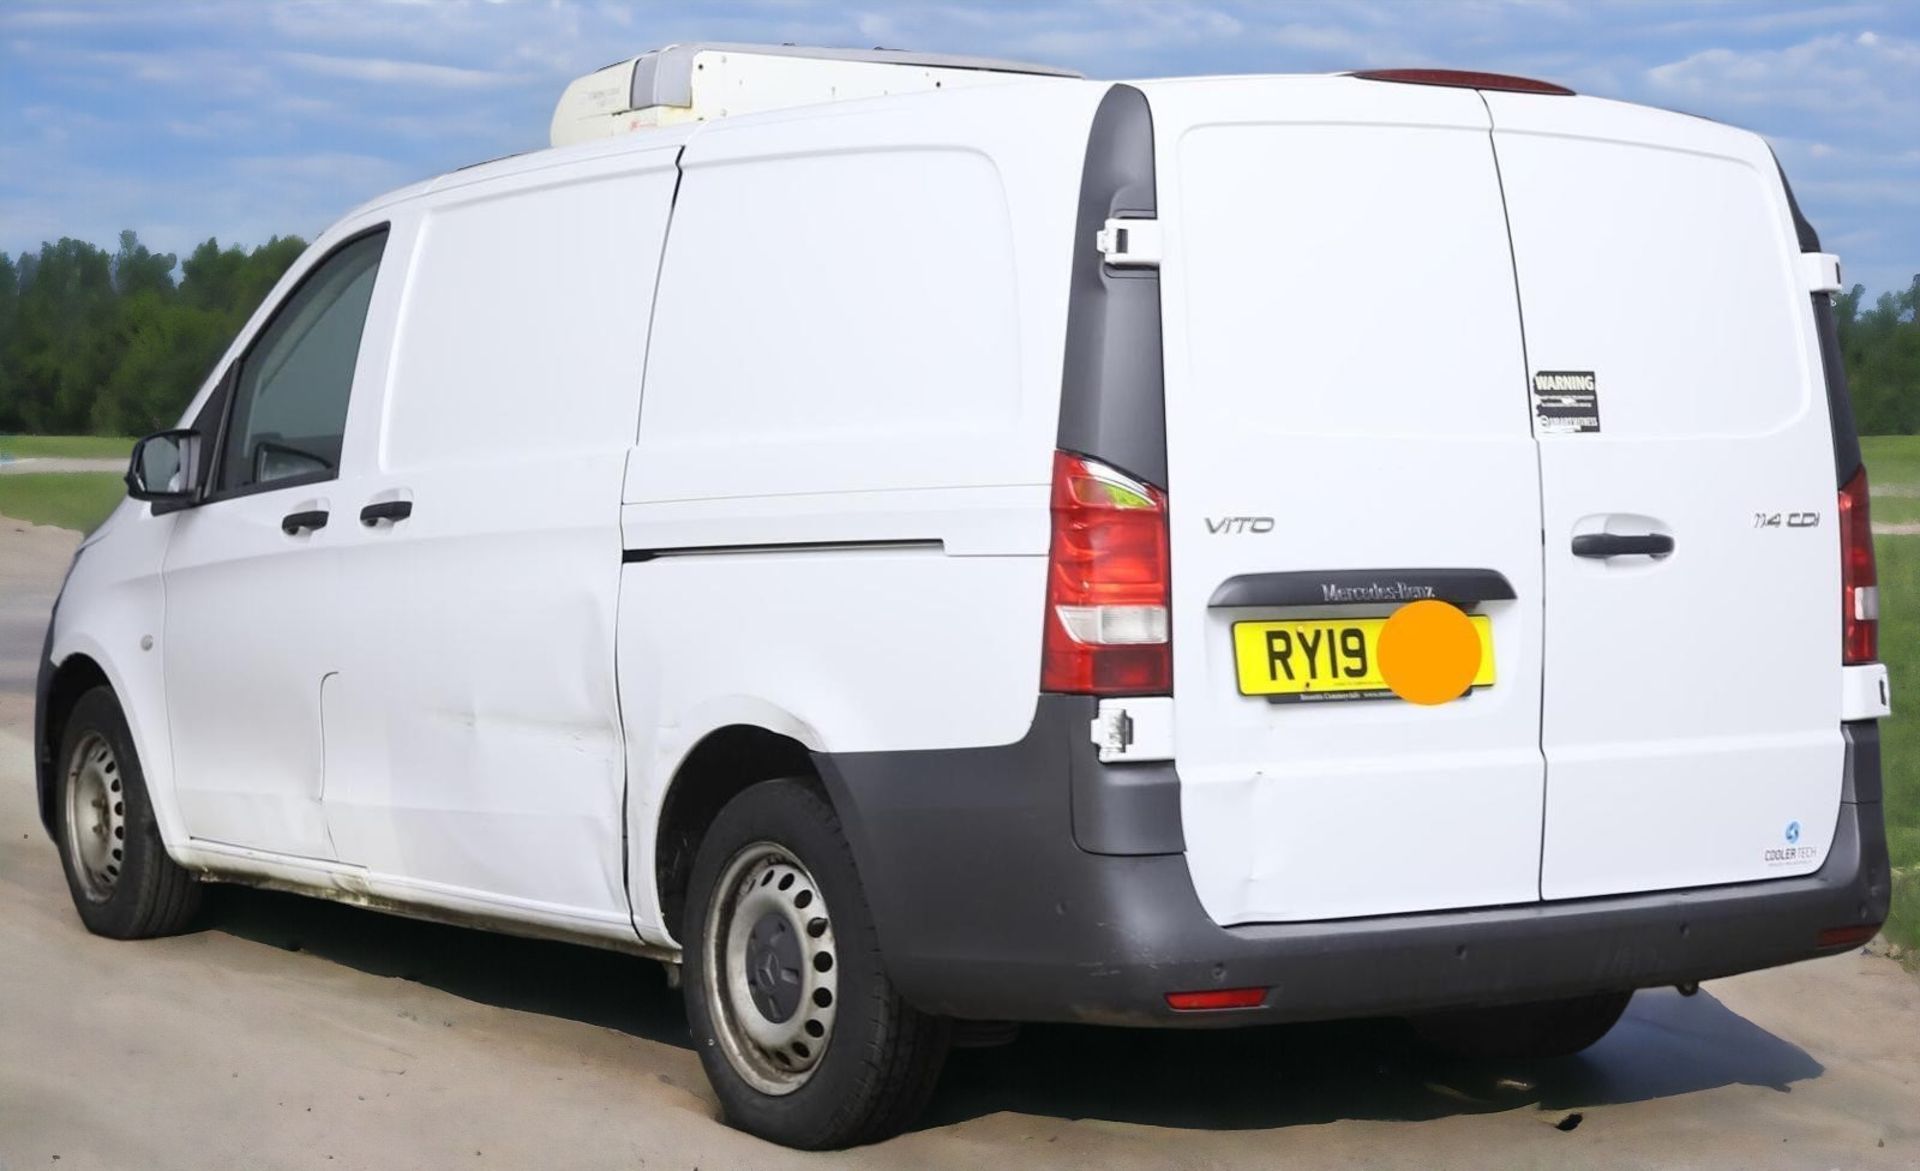 2019 MERCEDES BENZ VITO LWB FRIDGE VAN 114 CDI - YOUR RELIABLE REFRIGERATED SOLUTION - Image 3 of 12